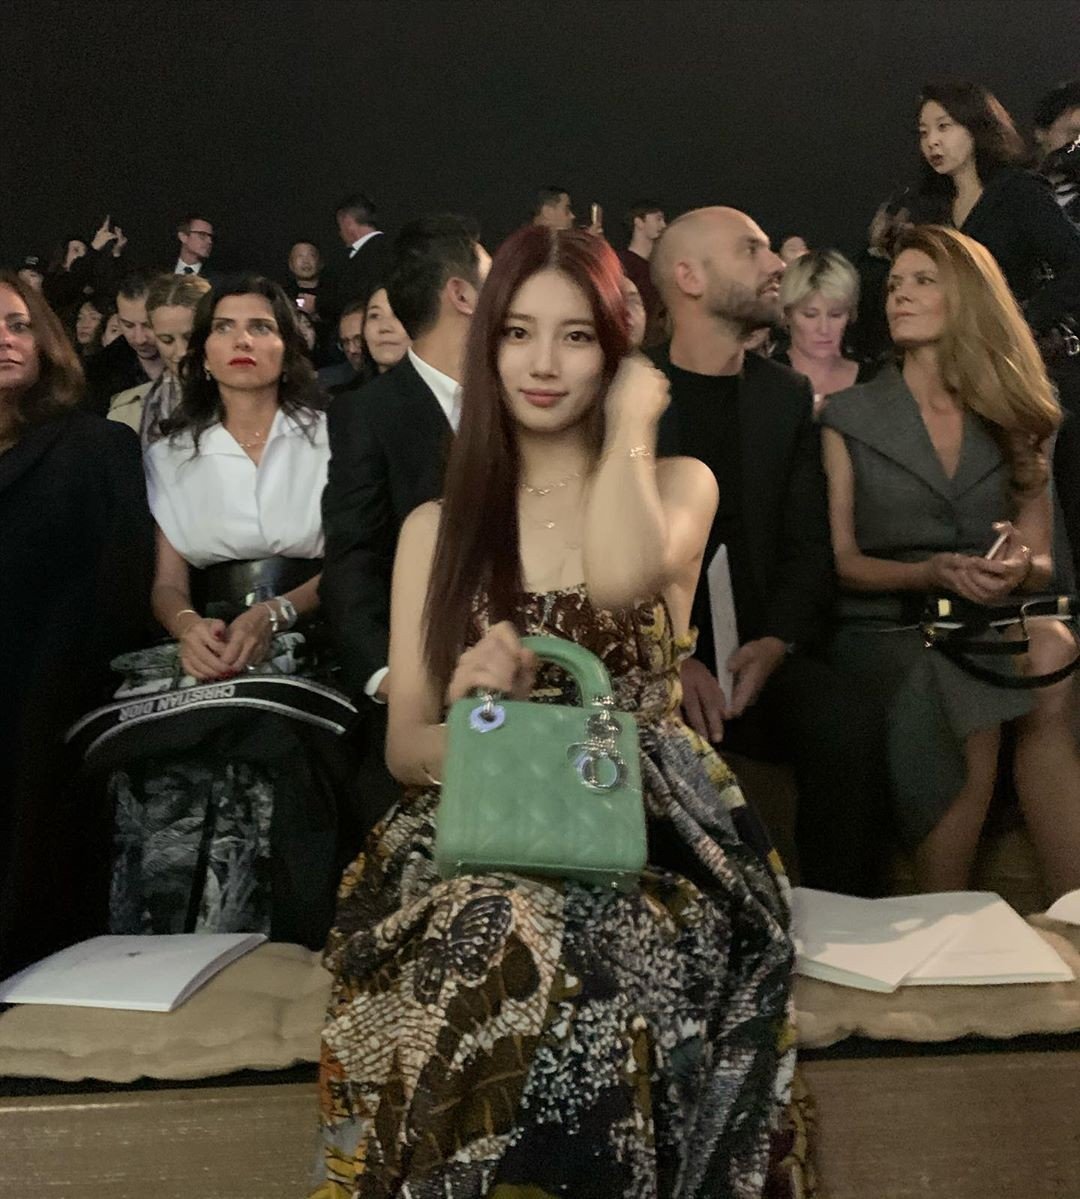 South Korean actress and singer Bae Su-ji, also known as Bae Suzy, at the Dior show at Paris Fashion Week. Photo: Instagram